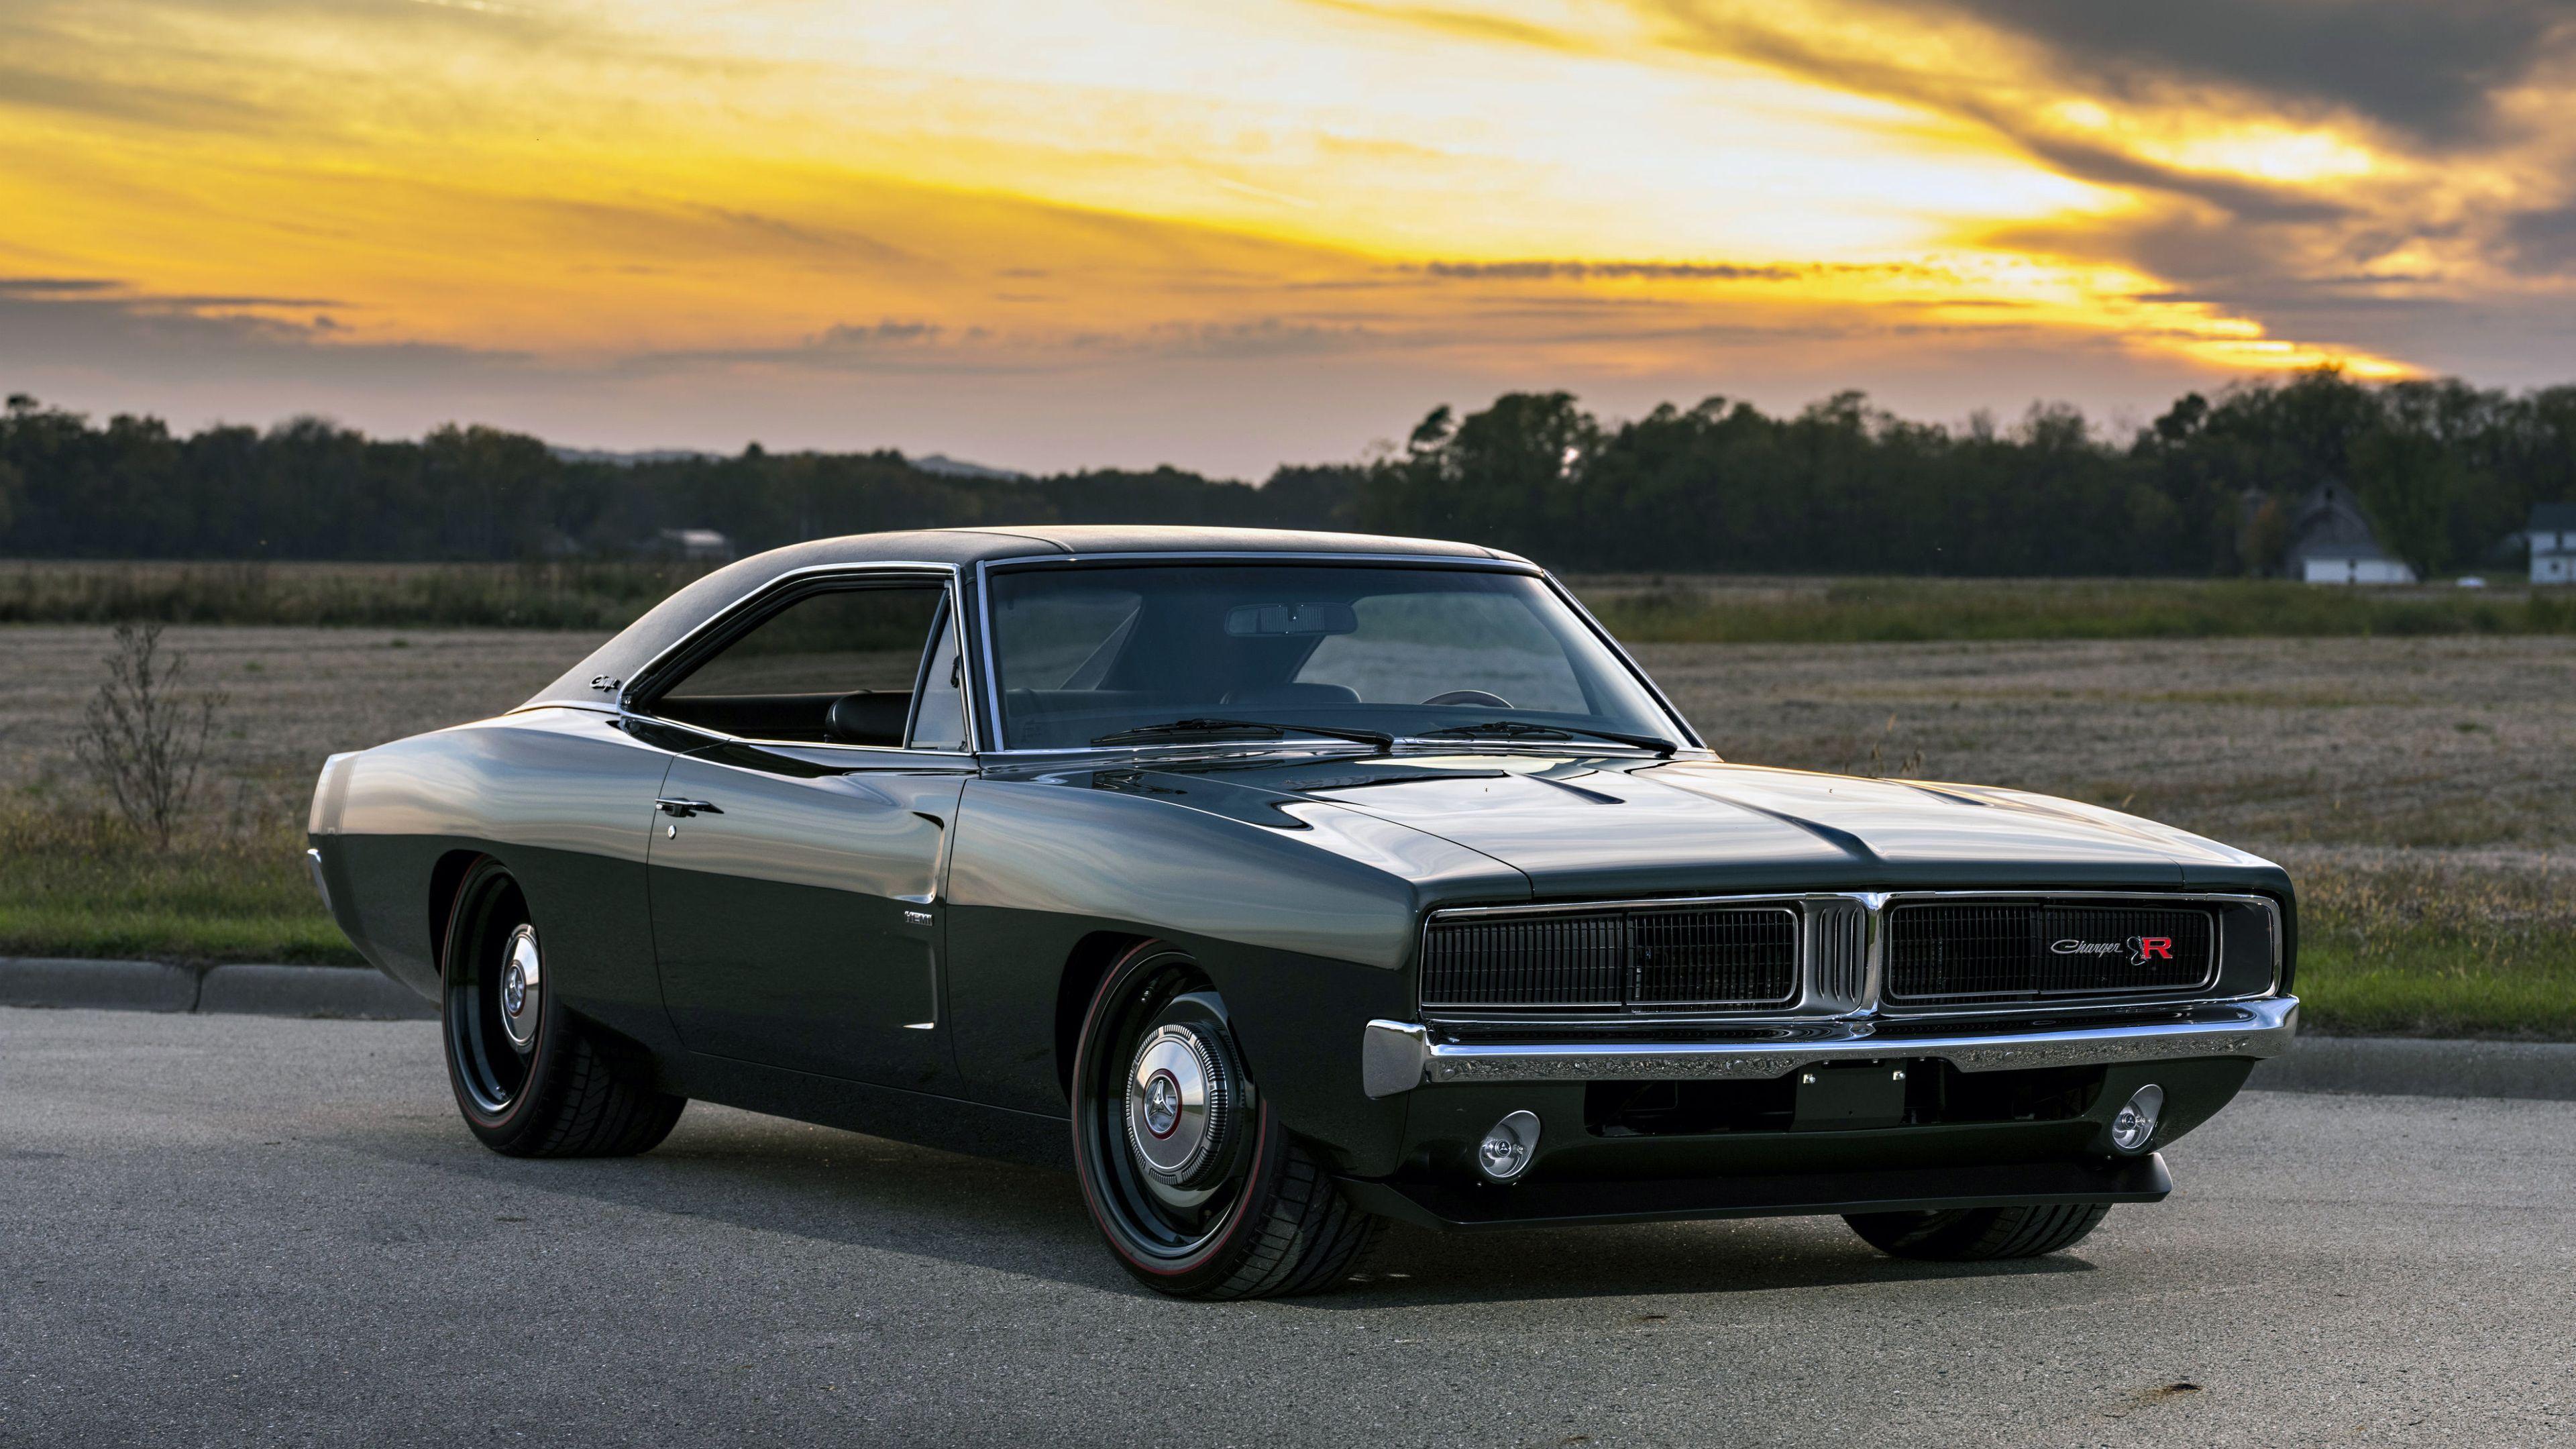 1969 Dodge Charger RT Wallpaper  Dodge charger rt Dodge charger art Dodge  charger